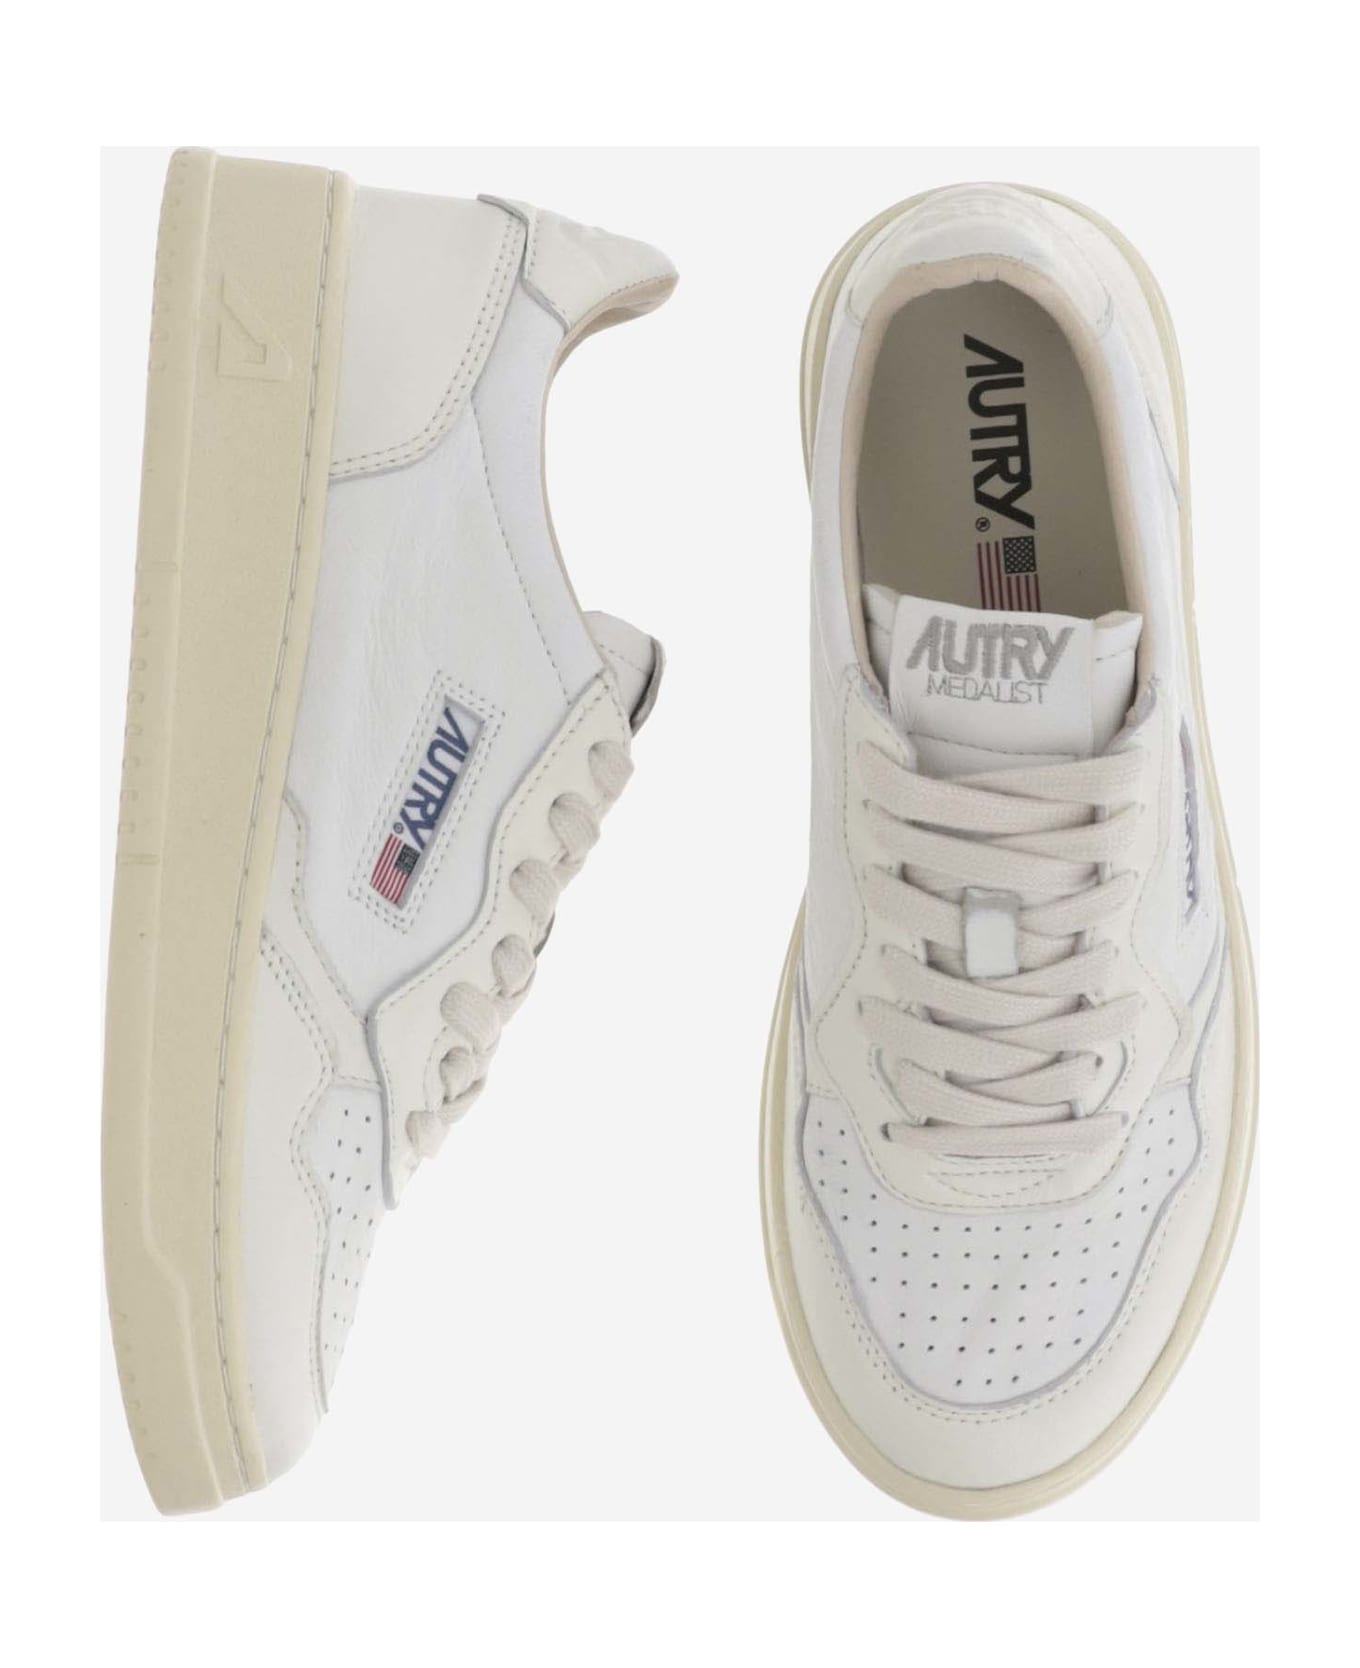 Autry Medalist Leather Sneakers - WHT/WHT